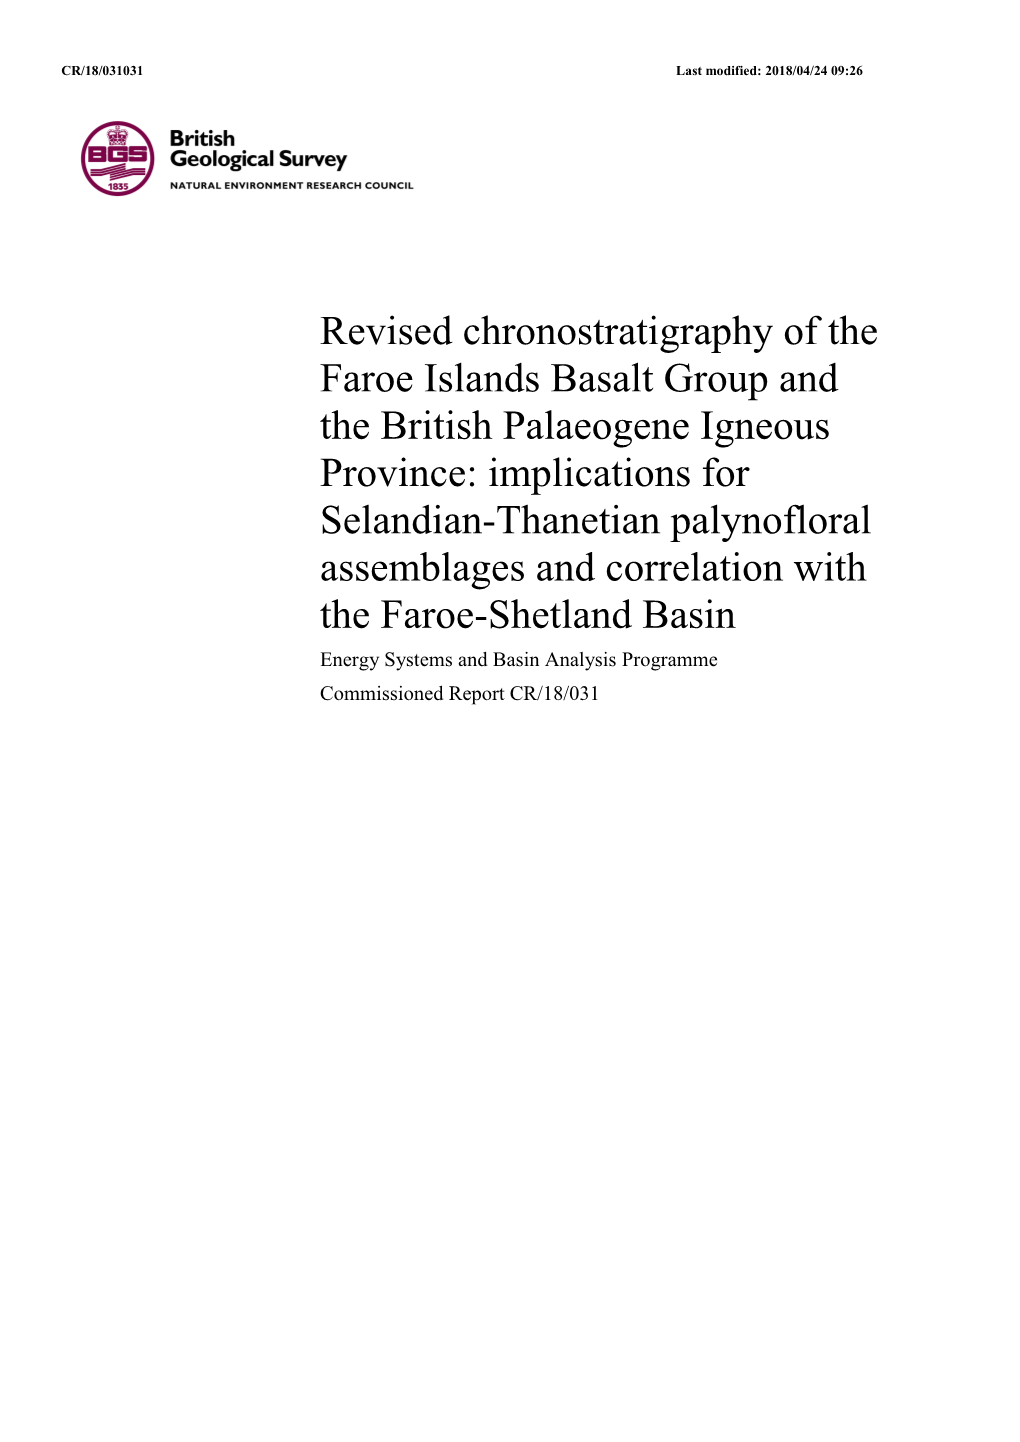 Revised Chronostratigraphy of the Faroe Islands Basalt Group and the British Palaeogene Igneous Province: Implications for Selandan-Thanetian Palynofloral Assemblages And